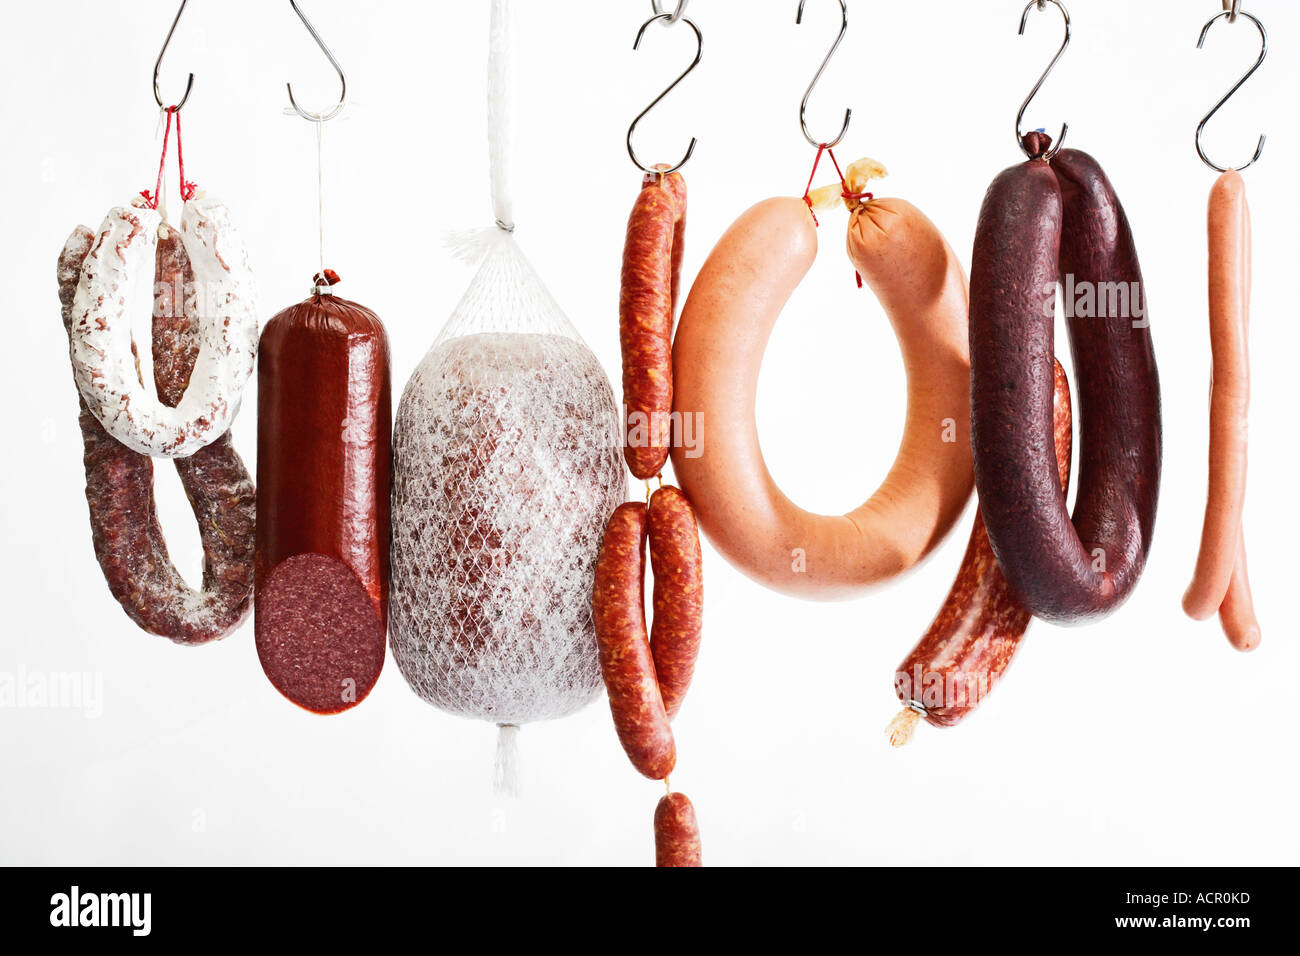 Sausages hanging on hooks Stock Photo